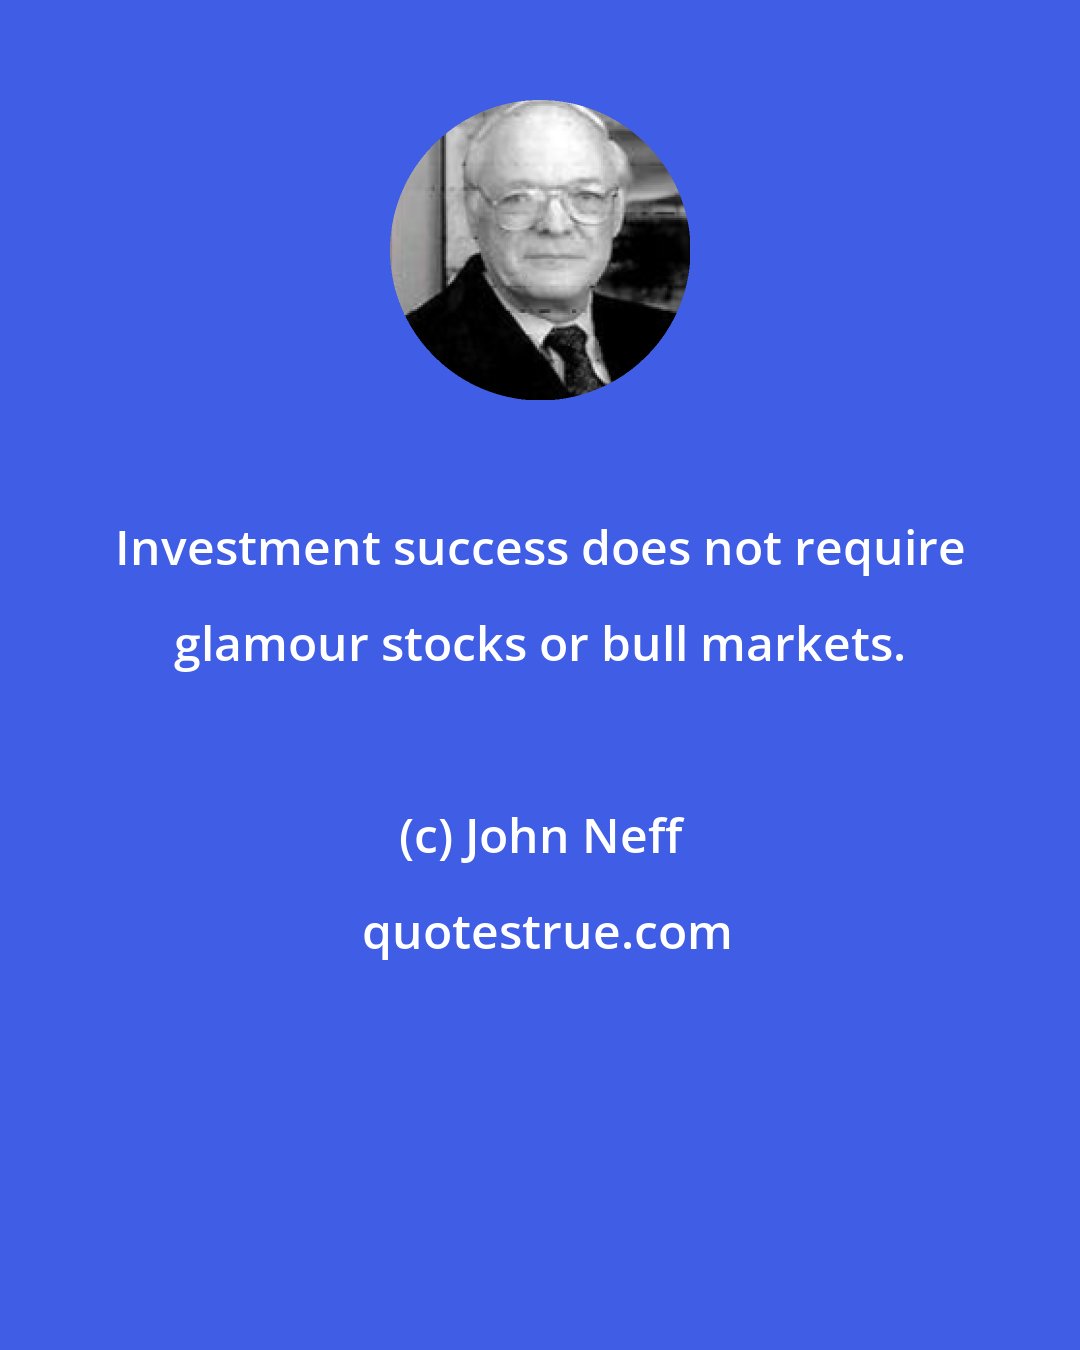 John Neff: Investment success does not require glamour stocks or bull markets.